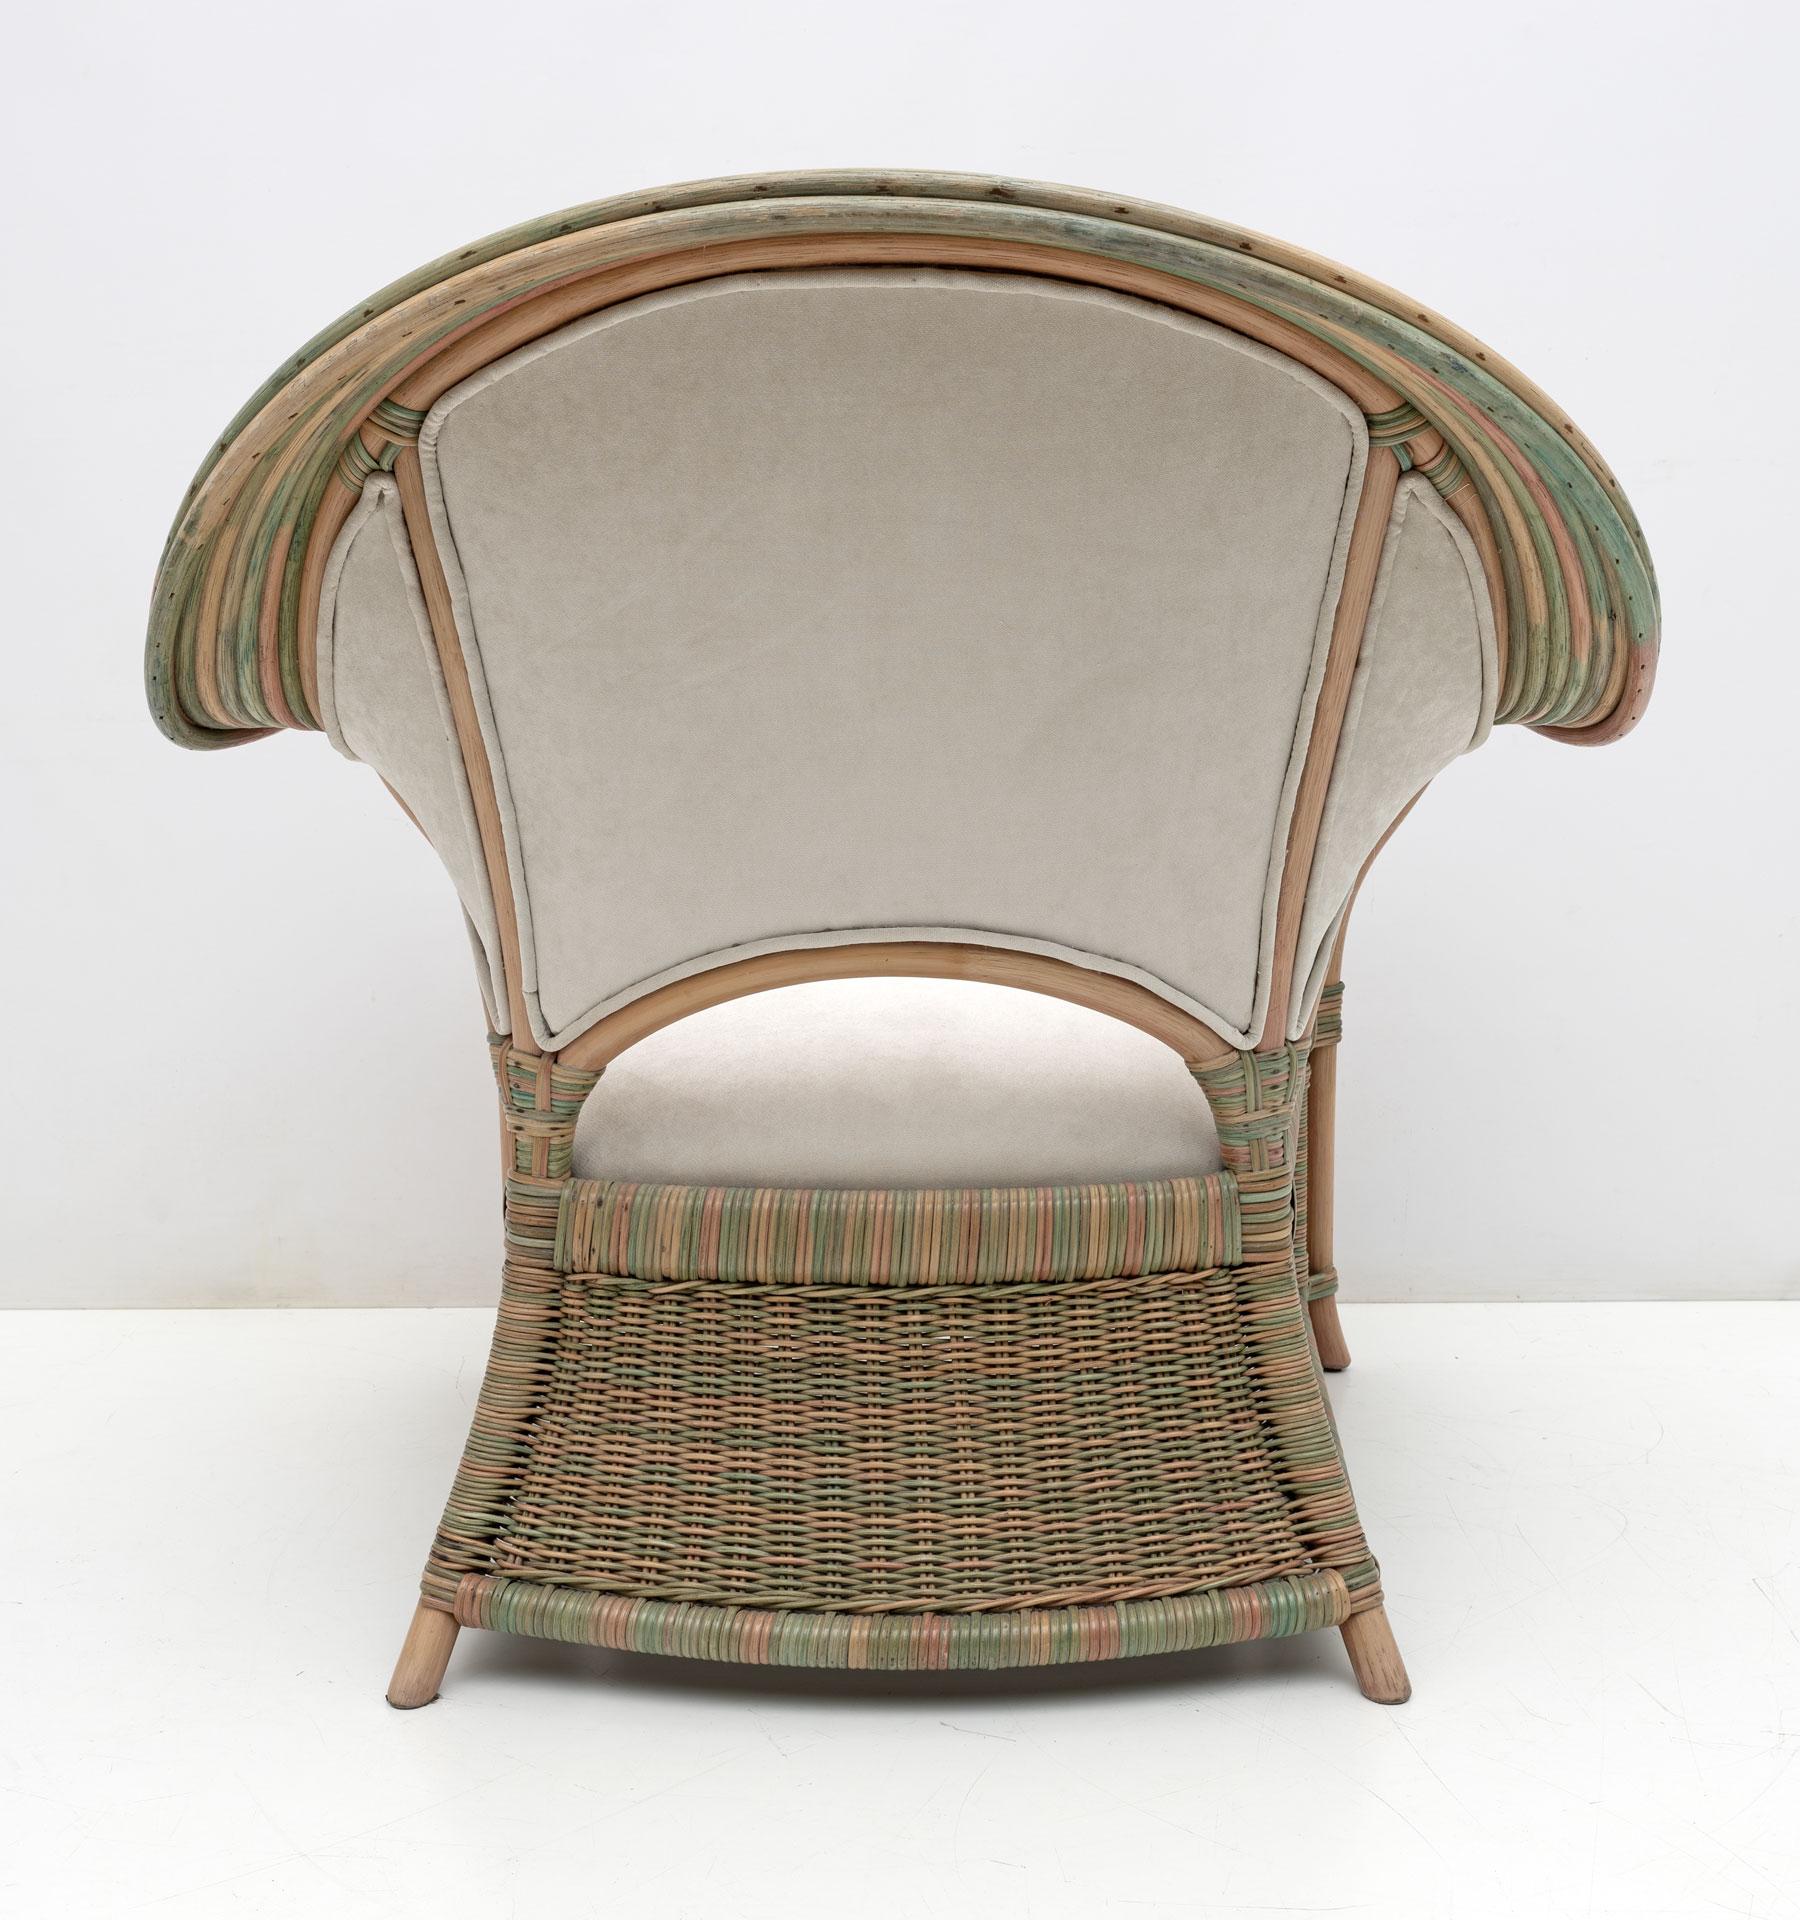 Pair of Mid-century Modern Italian Rattan and Wicker Armchairs, 1970s For Sale 6